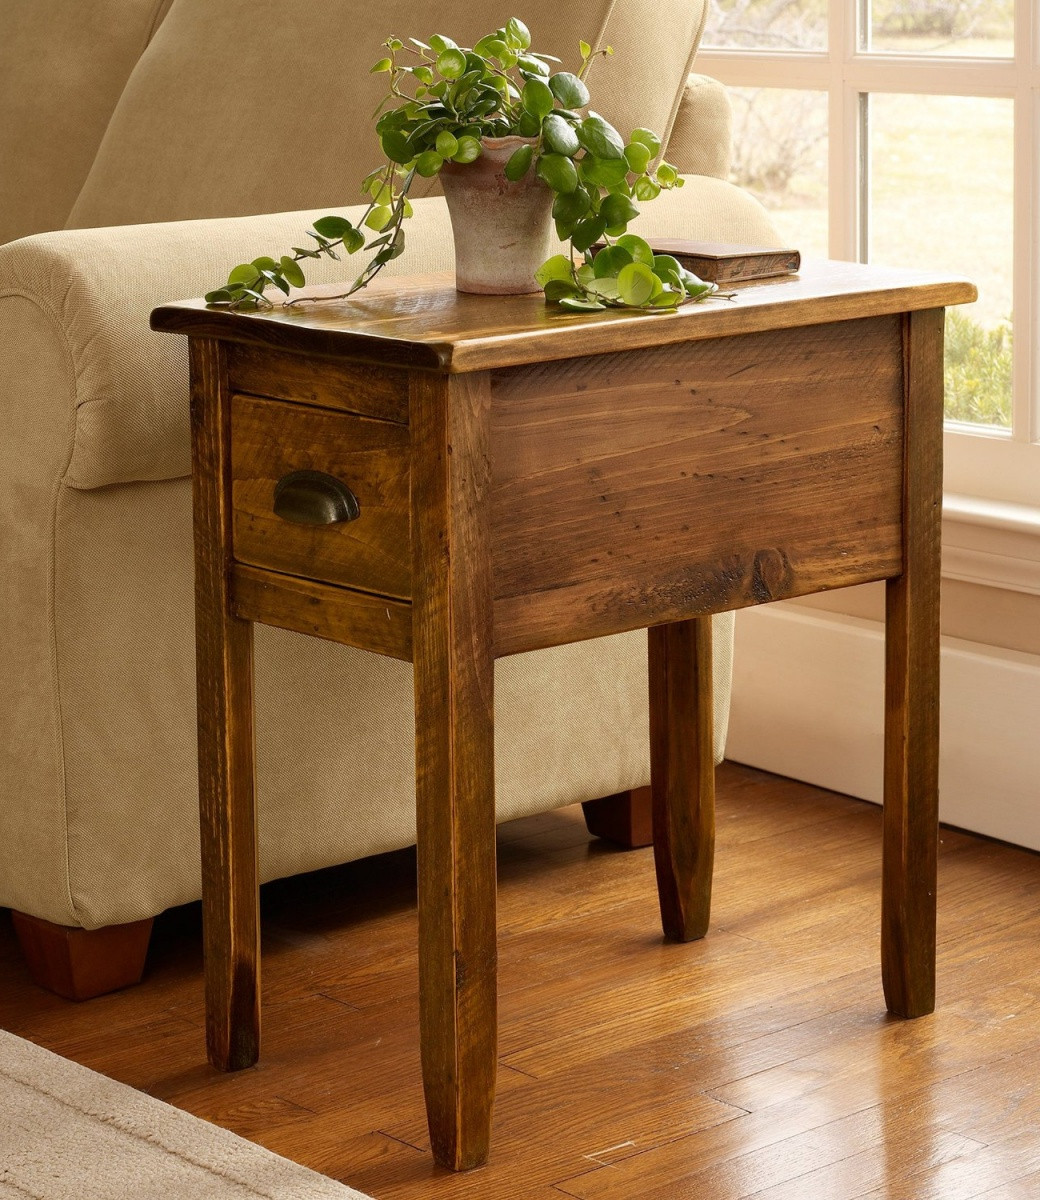 Side Table Living Room
 Side Tables for Living Room Ideas for Small Spaces